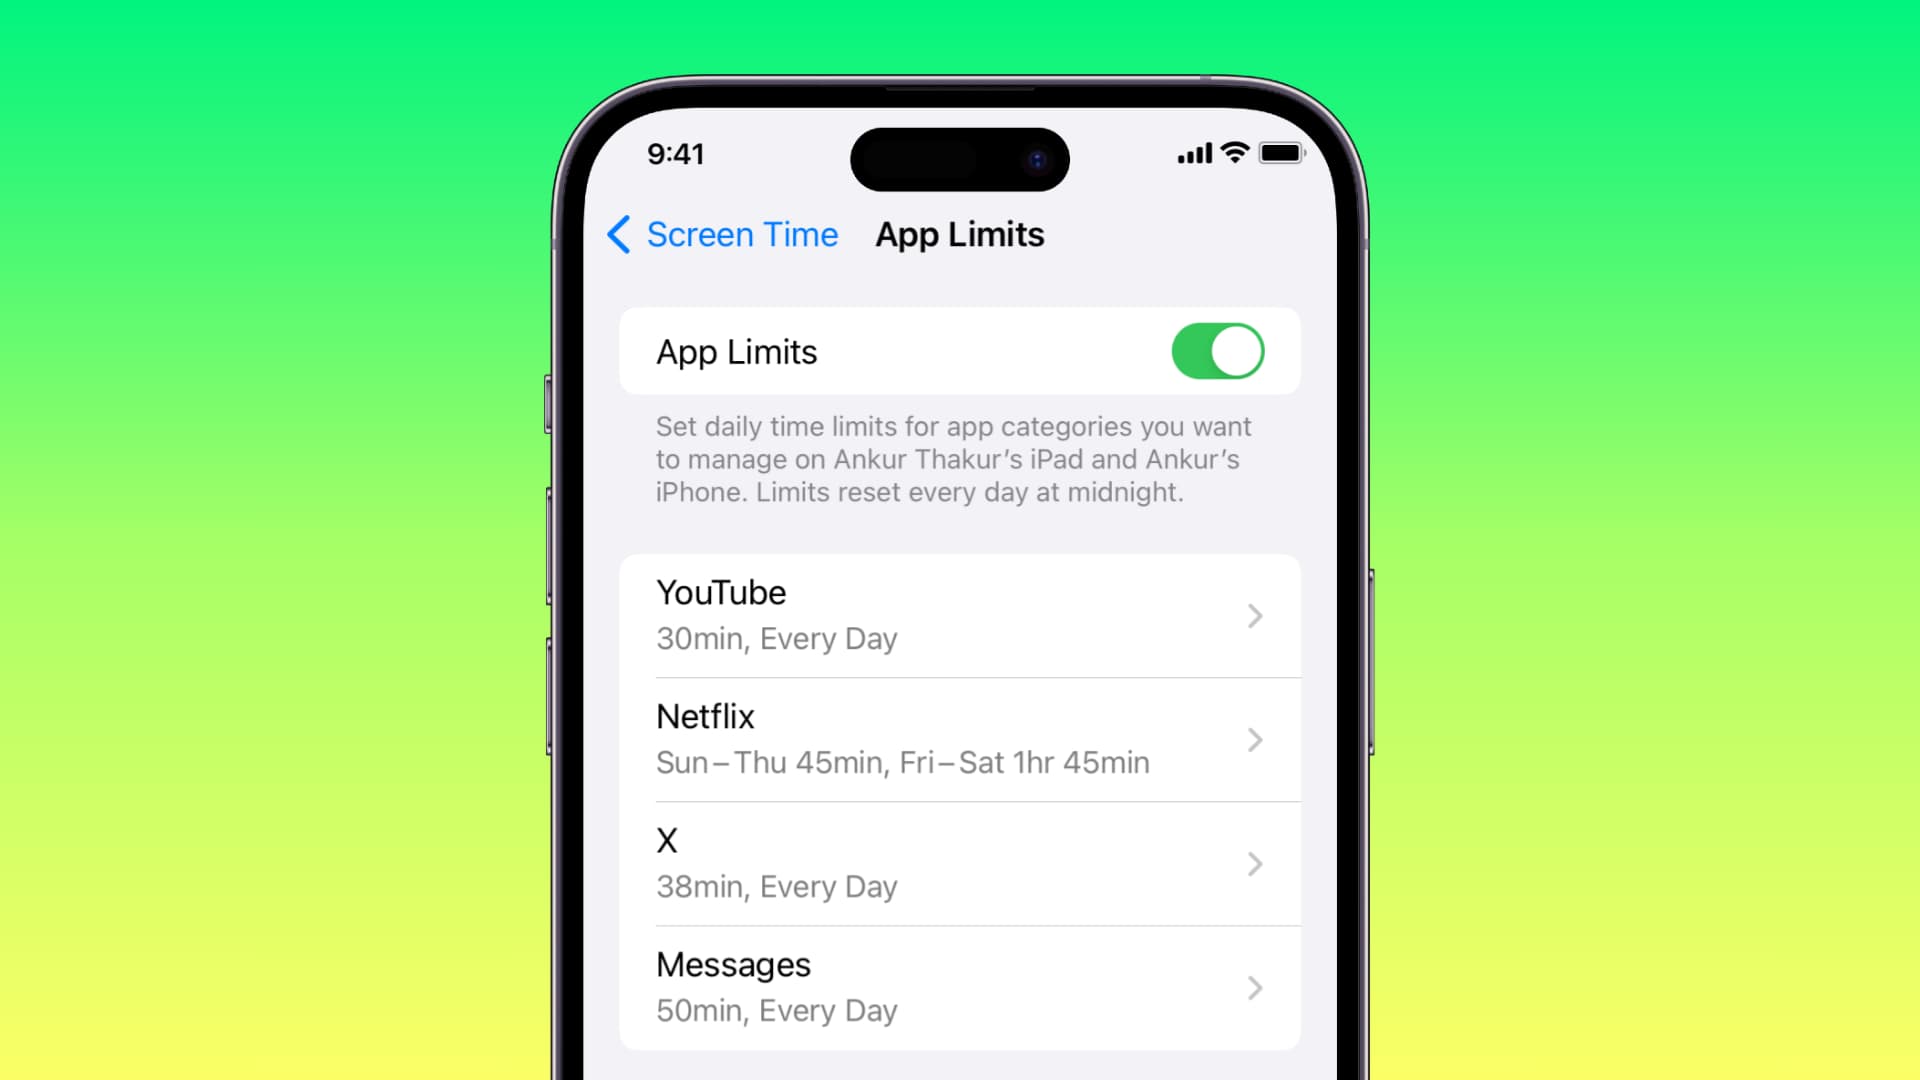 App Limits for YouTube, Netflix, Twitter, and Messages in iPhone Screen Time settings